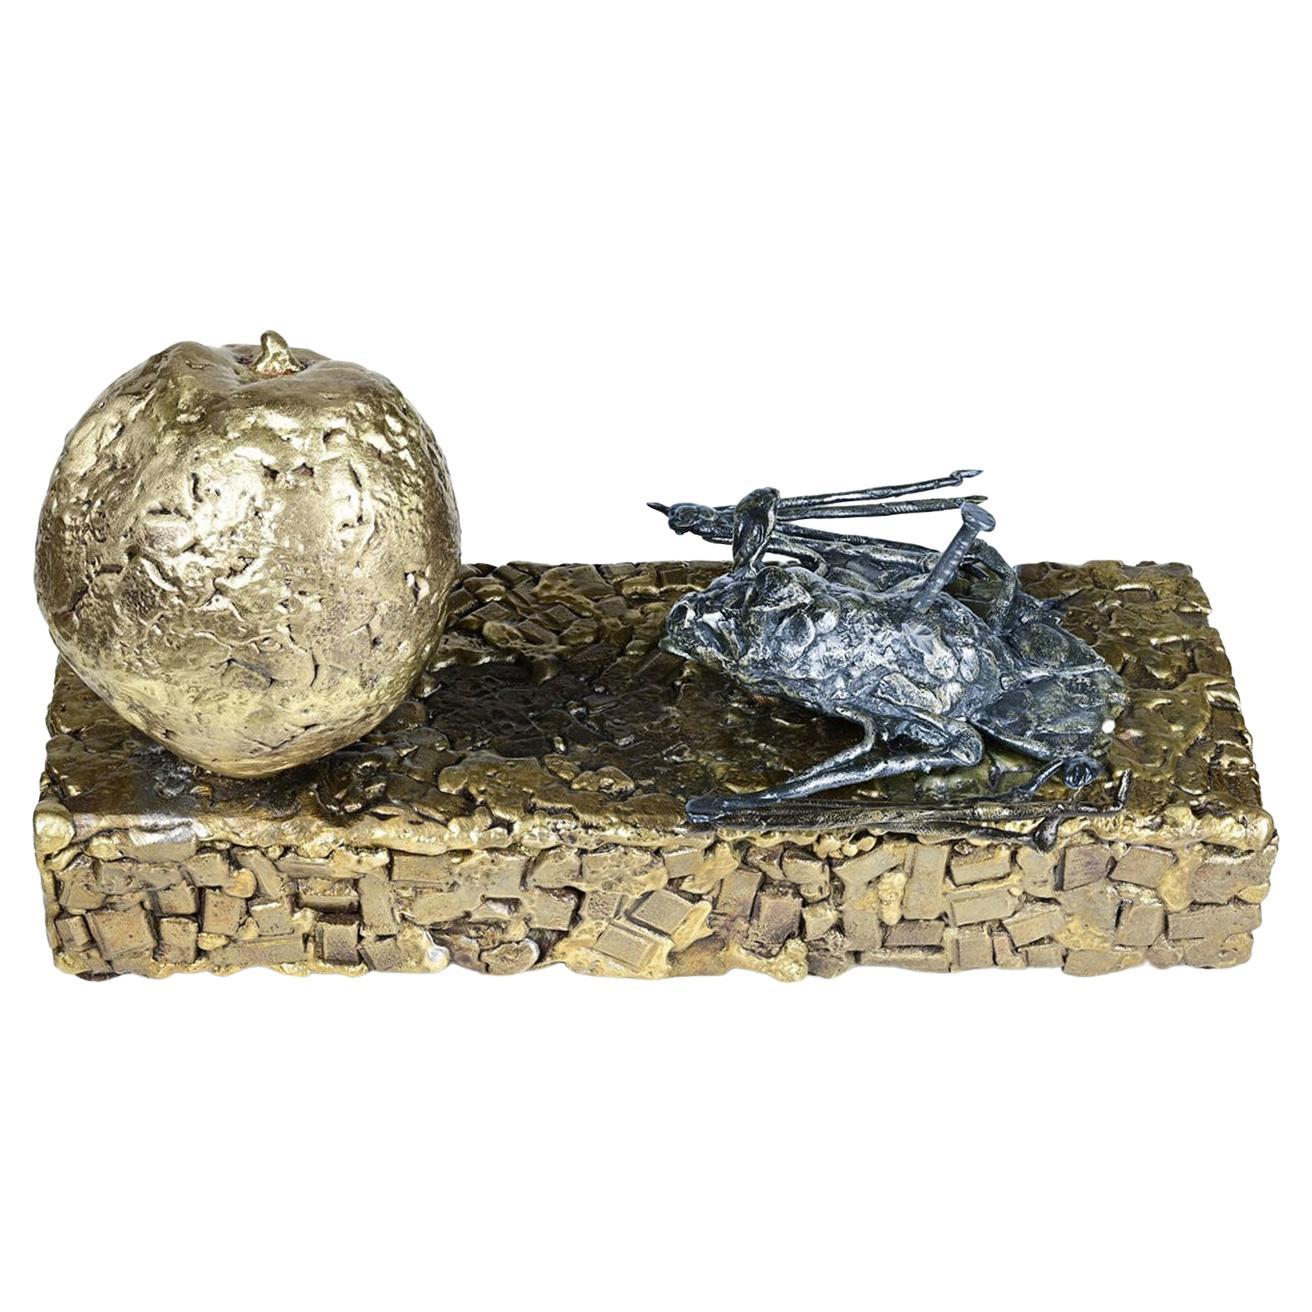 Irrevocable Moment - Bronze Still Life with Bat and Apple on Mosaic Bronze Base